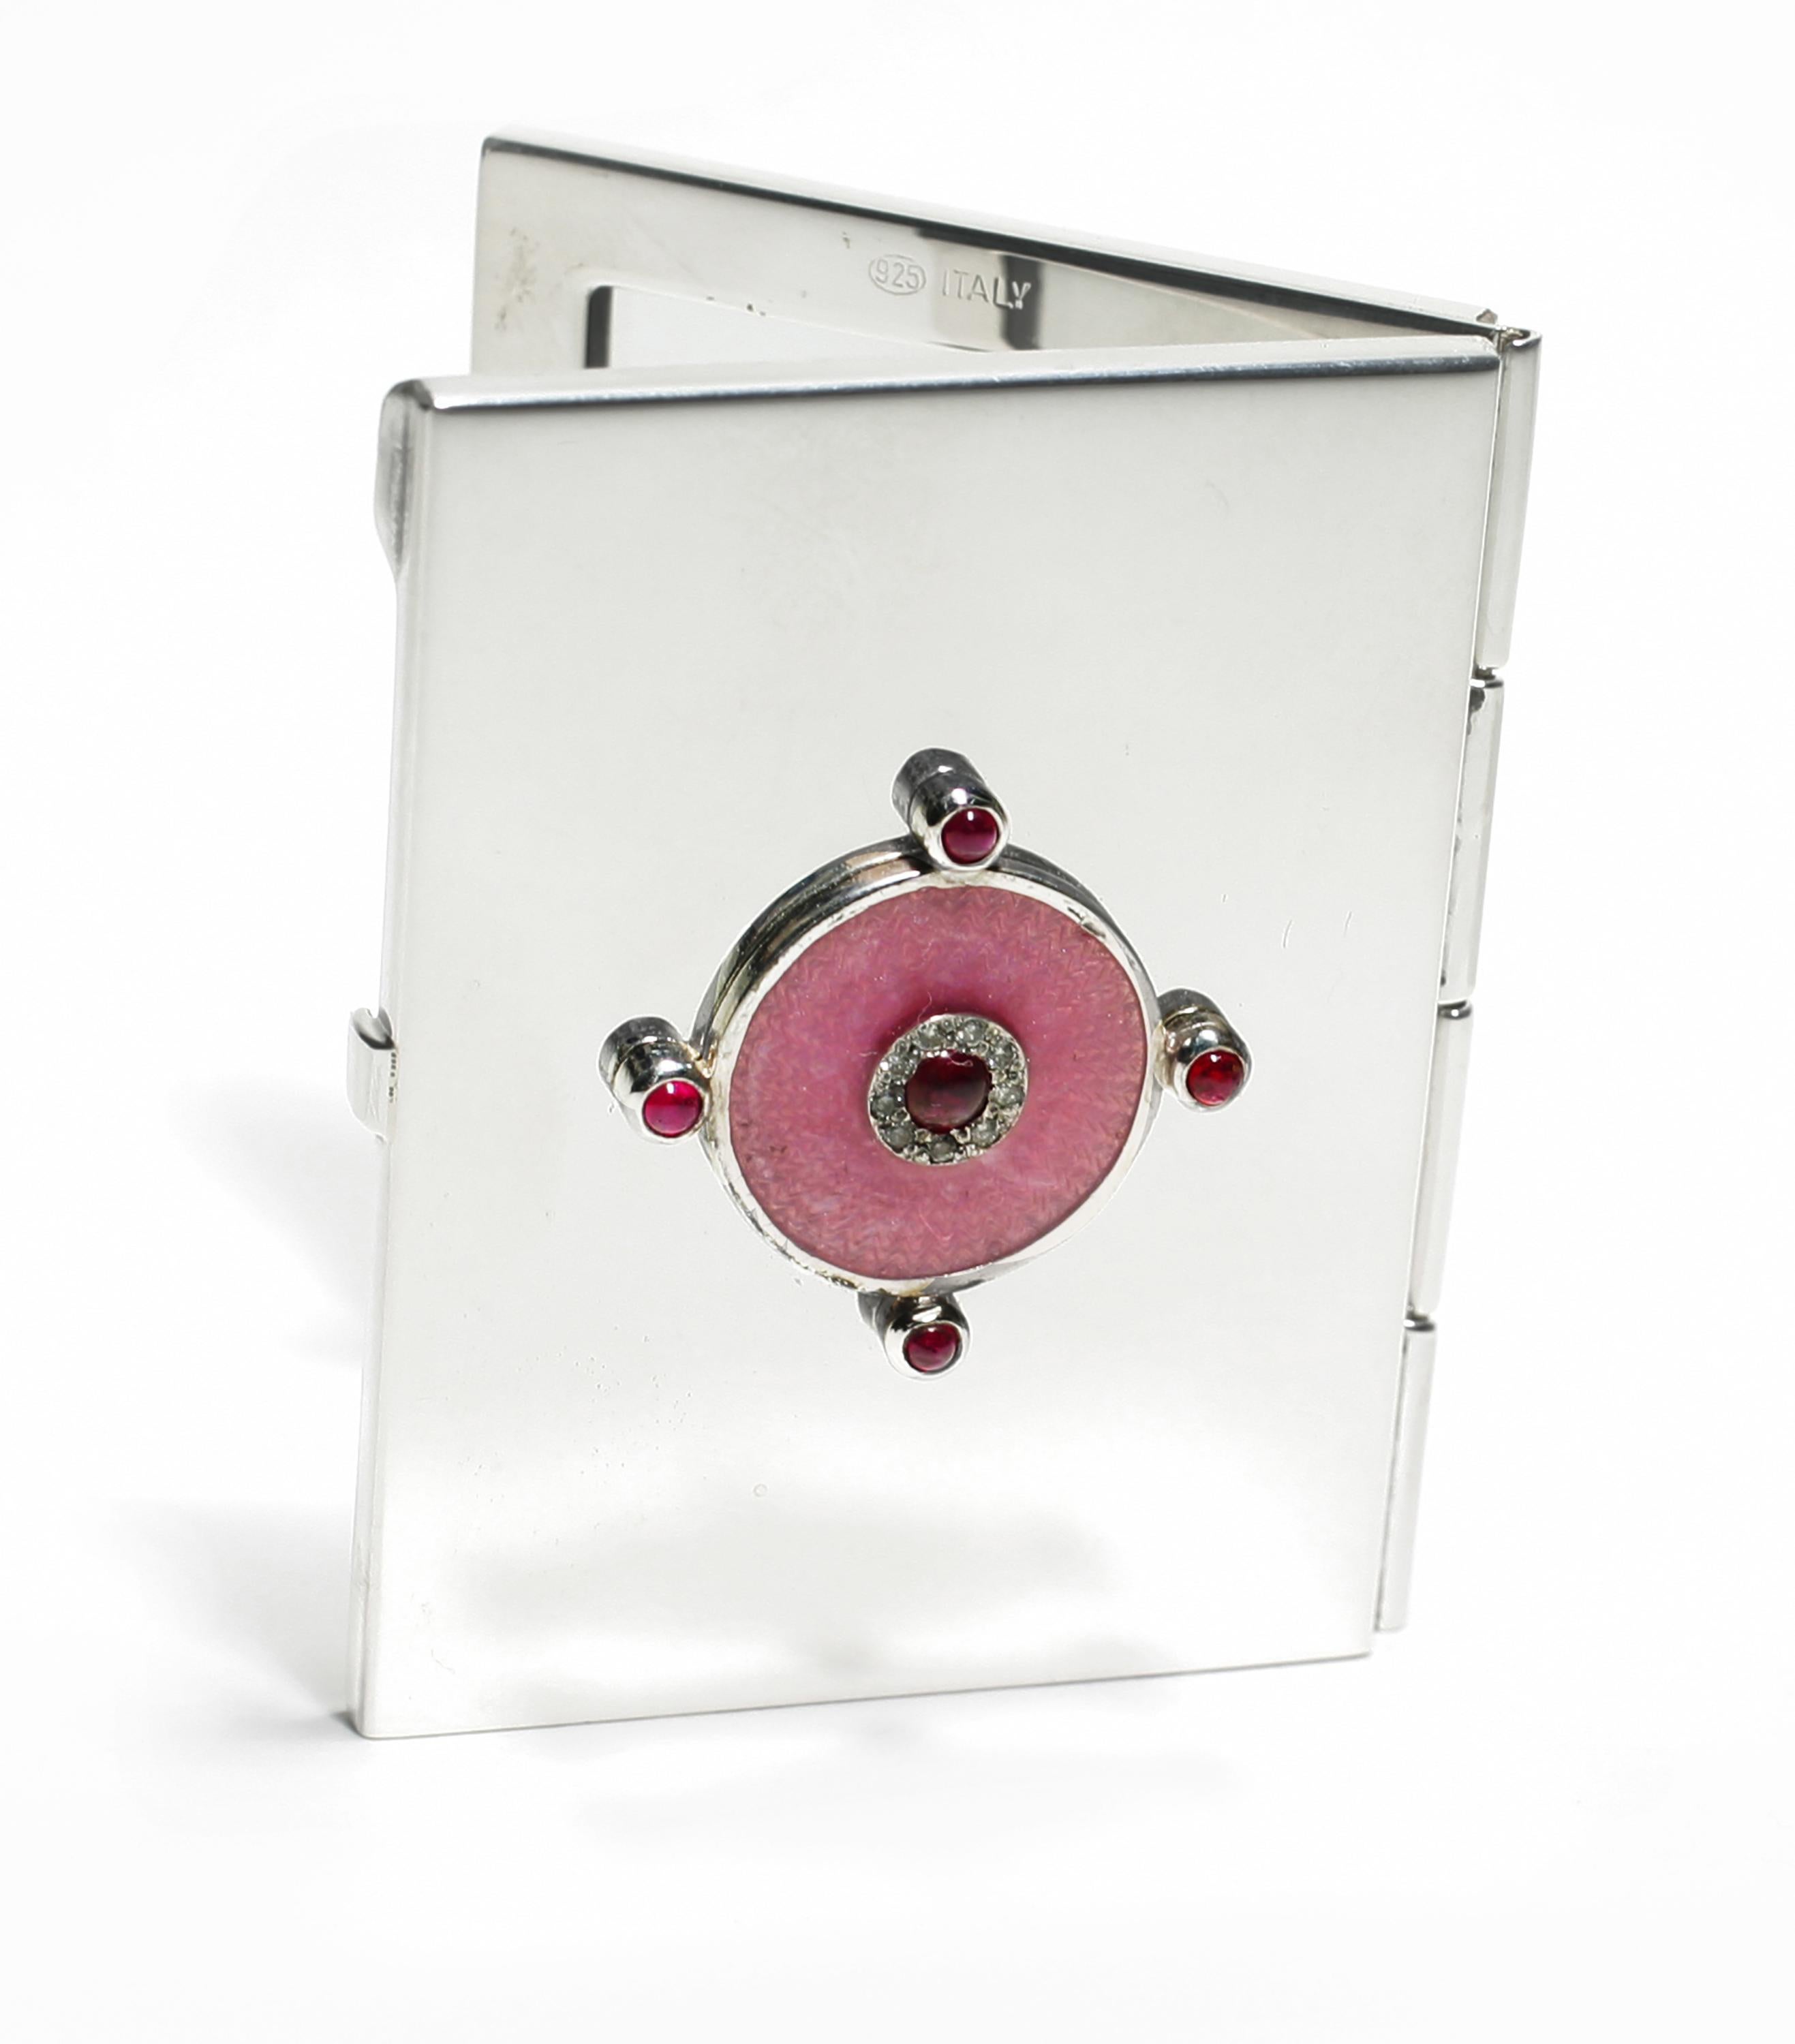 20th-century sterling silver Guilloché pink enamel mirror case
Cabochon rubies weighing 1.16 carats
Diamonds weighing 0.15 carats
Handmade in Italy
The Ocie Minaudiere collection was created to incorporate precious gemstones into evening luxury